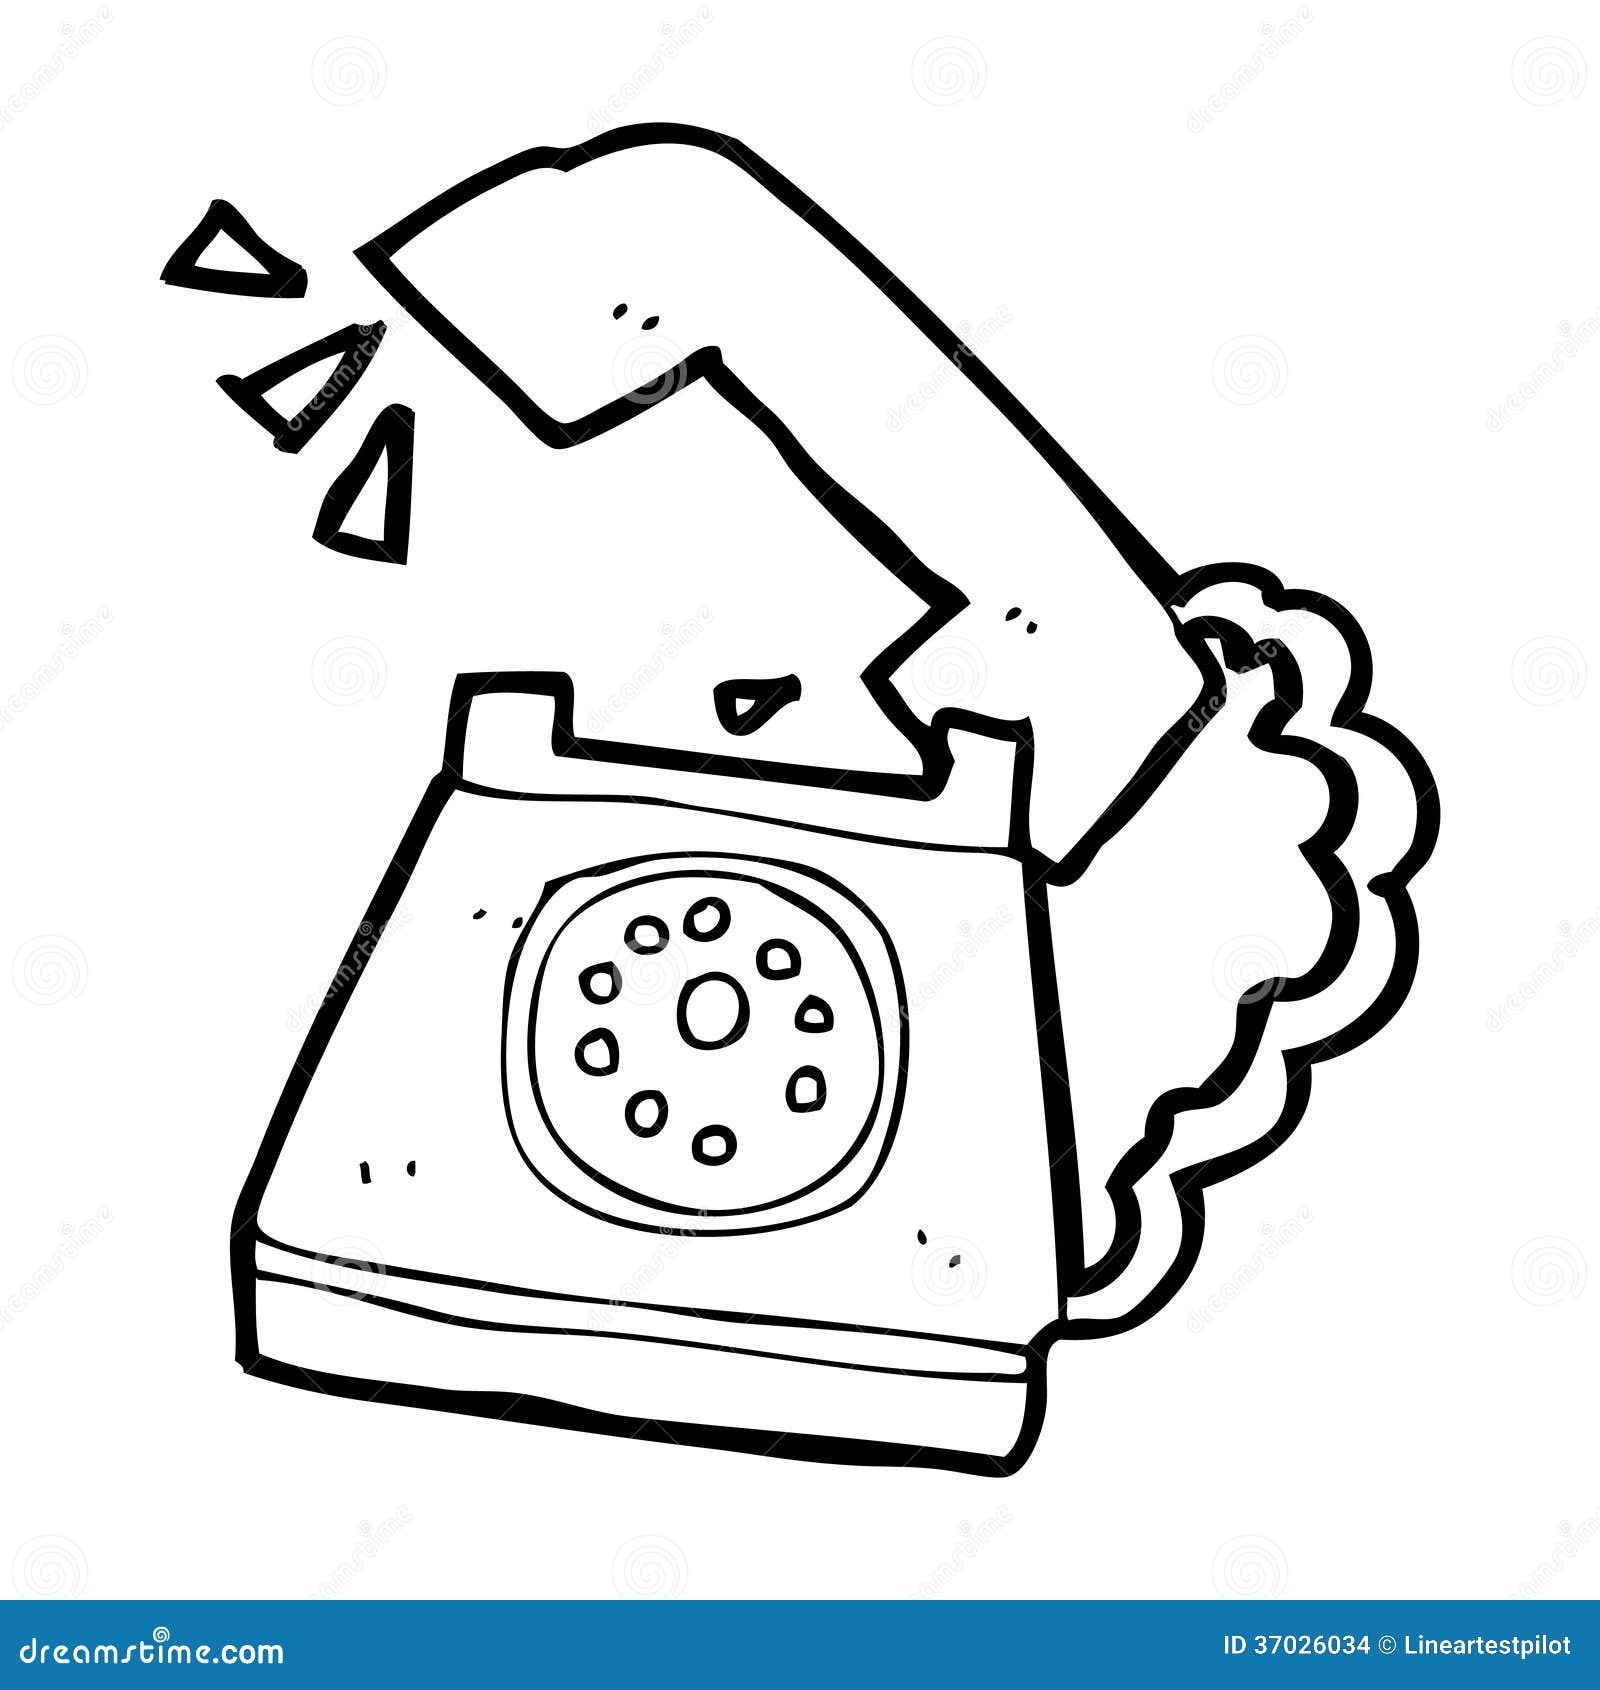 phone clipart black and white - photo #45